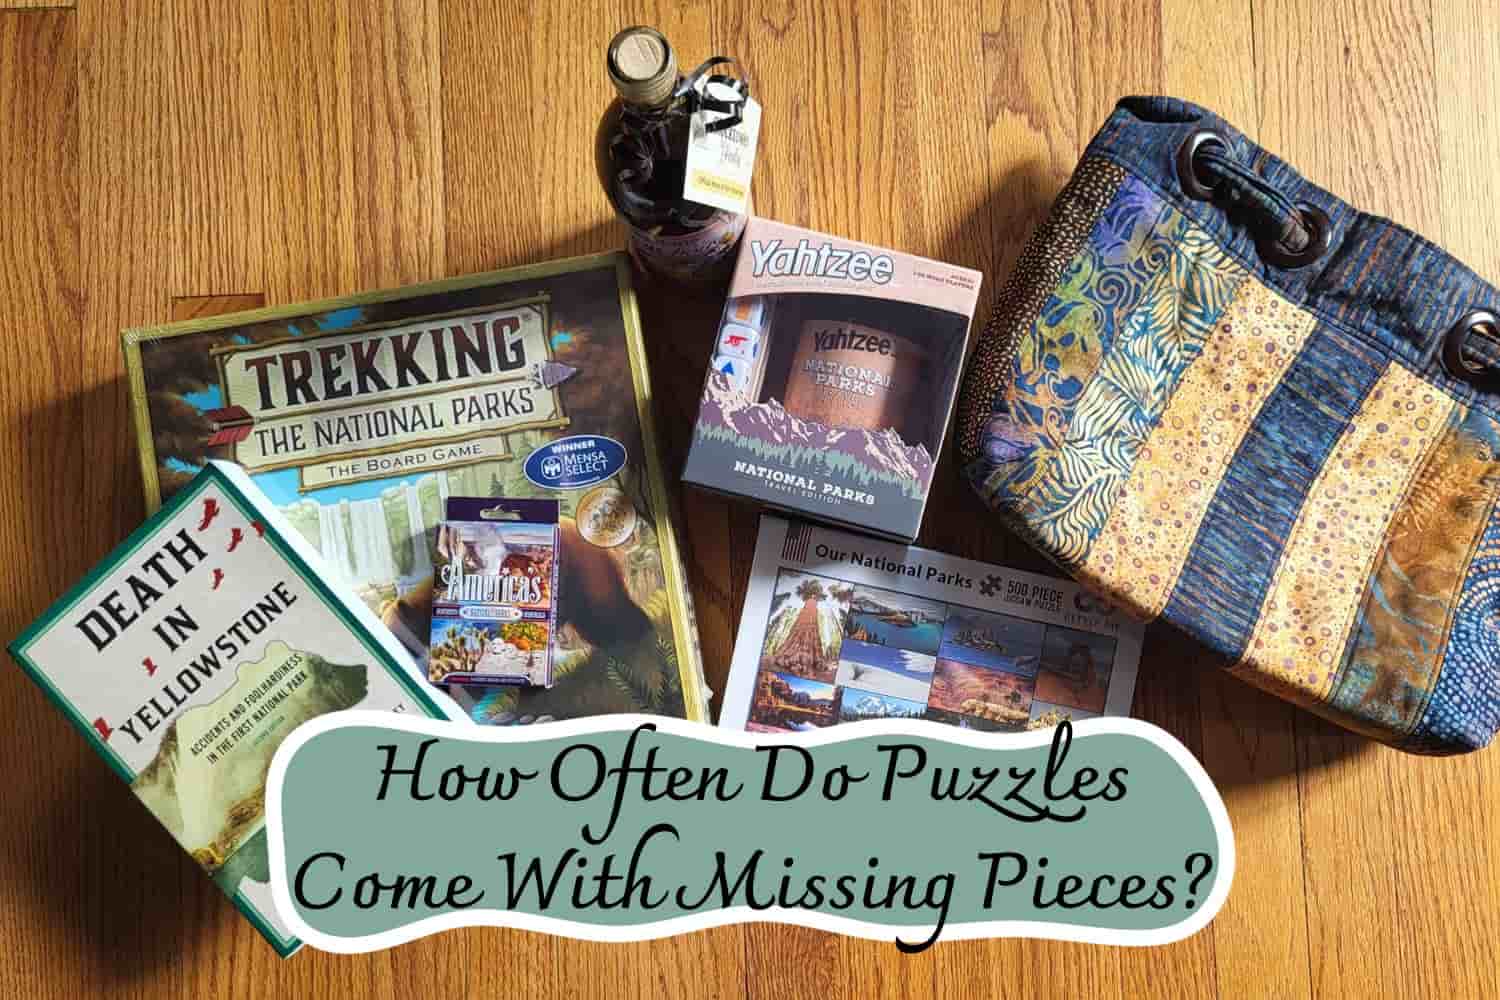 How Often Do Puzzles Come With Missing Pieces?